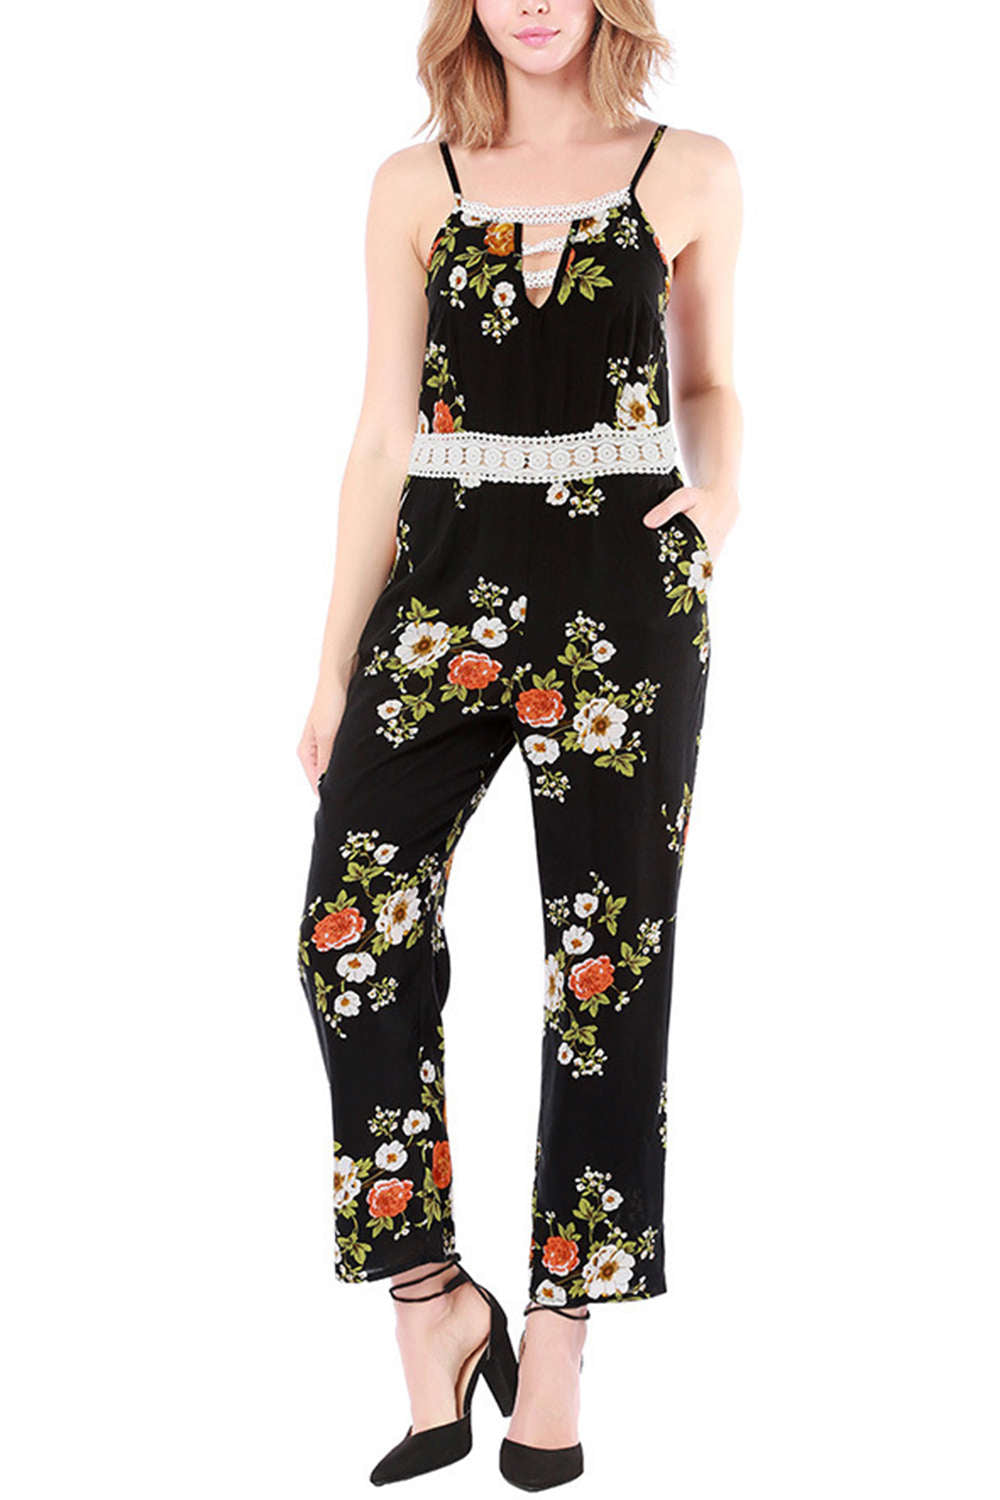 Iyasson Women's Floral Print Jumpsuits